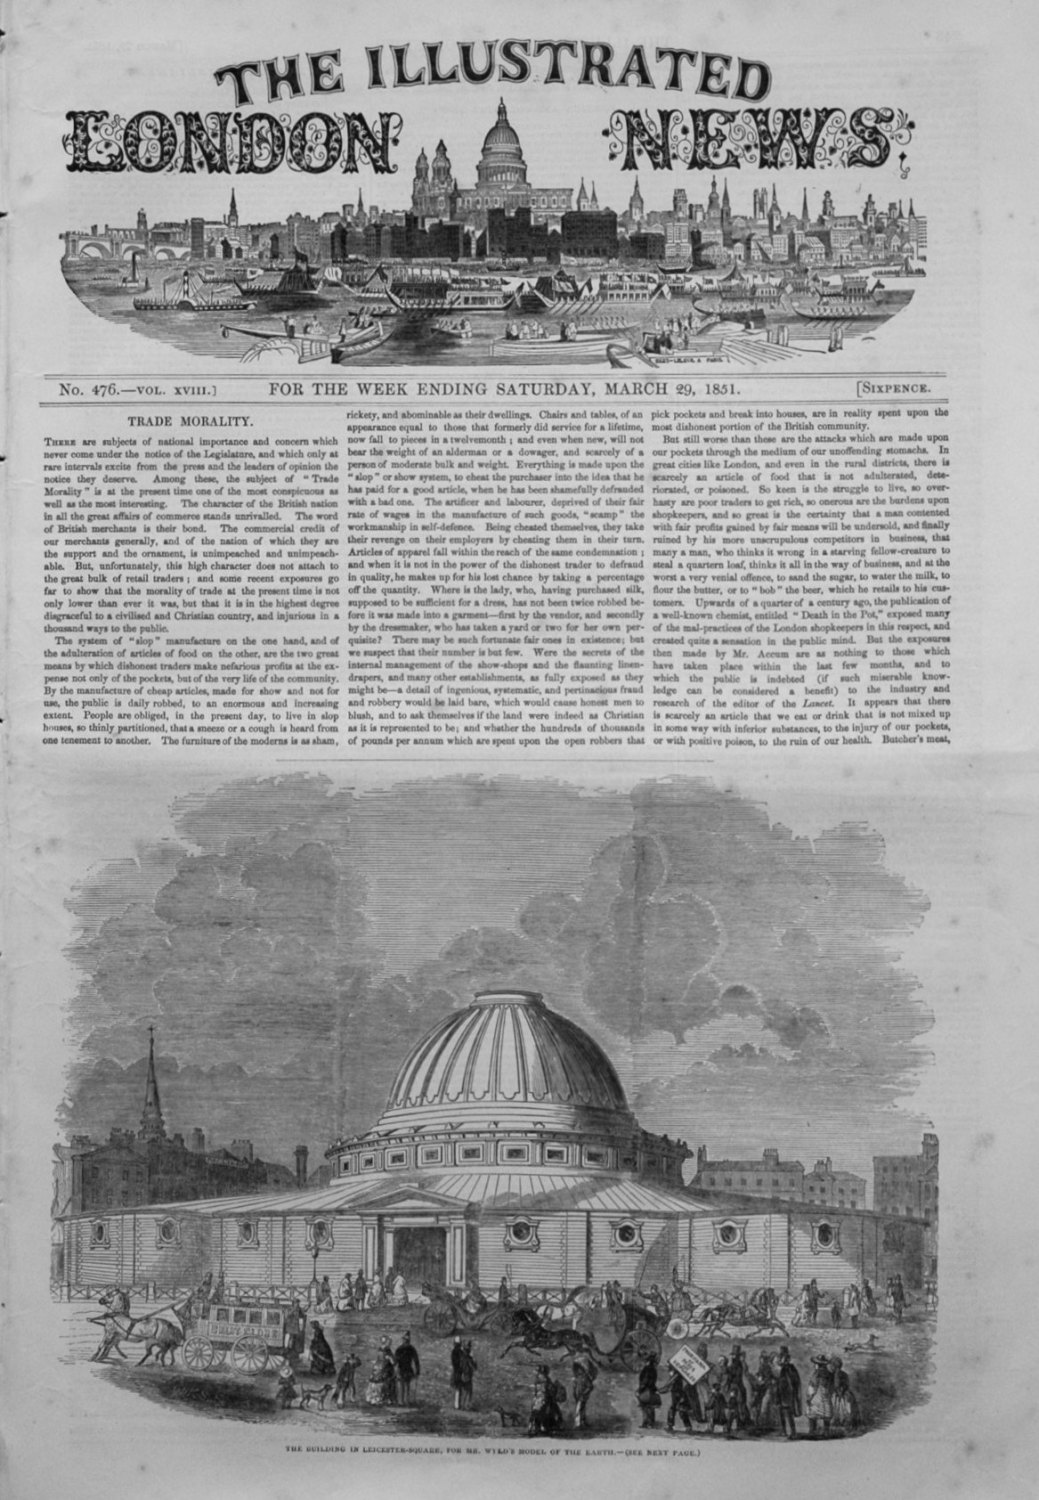 Illustrated London News March 29th 1851.